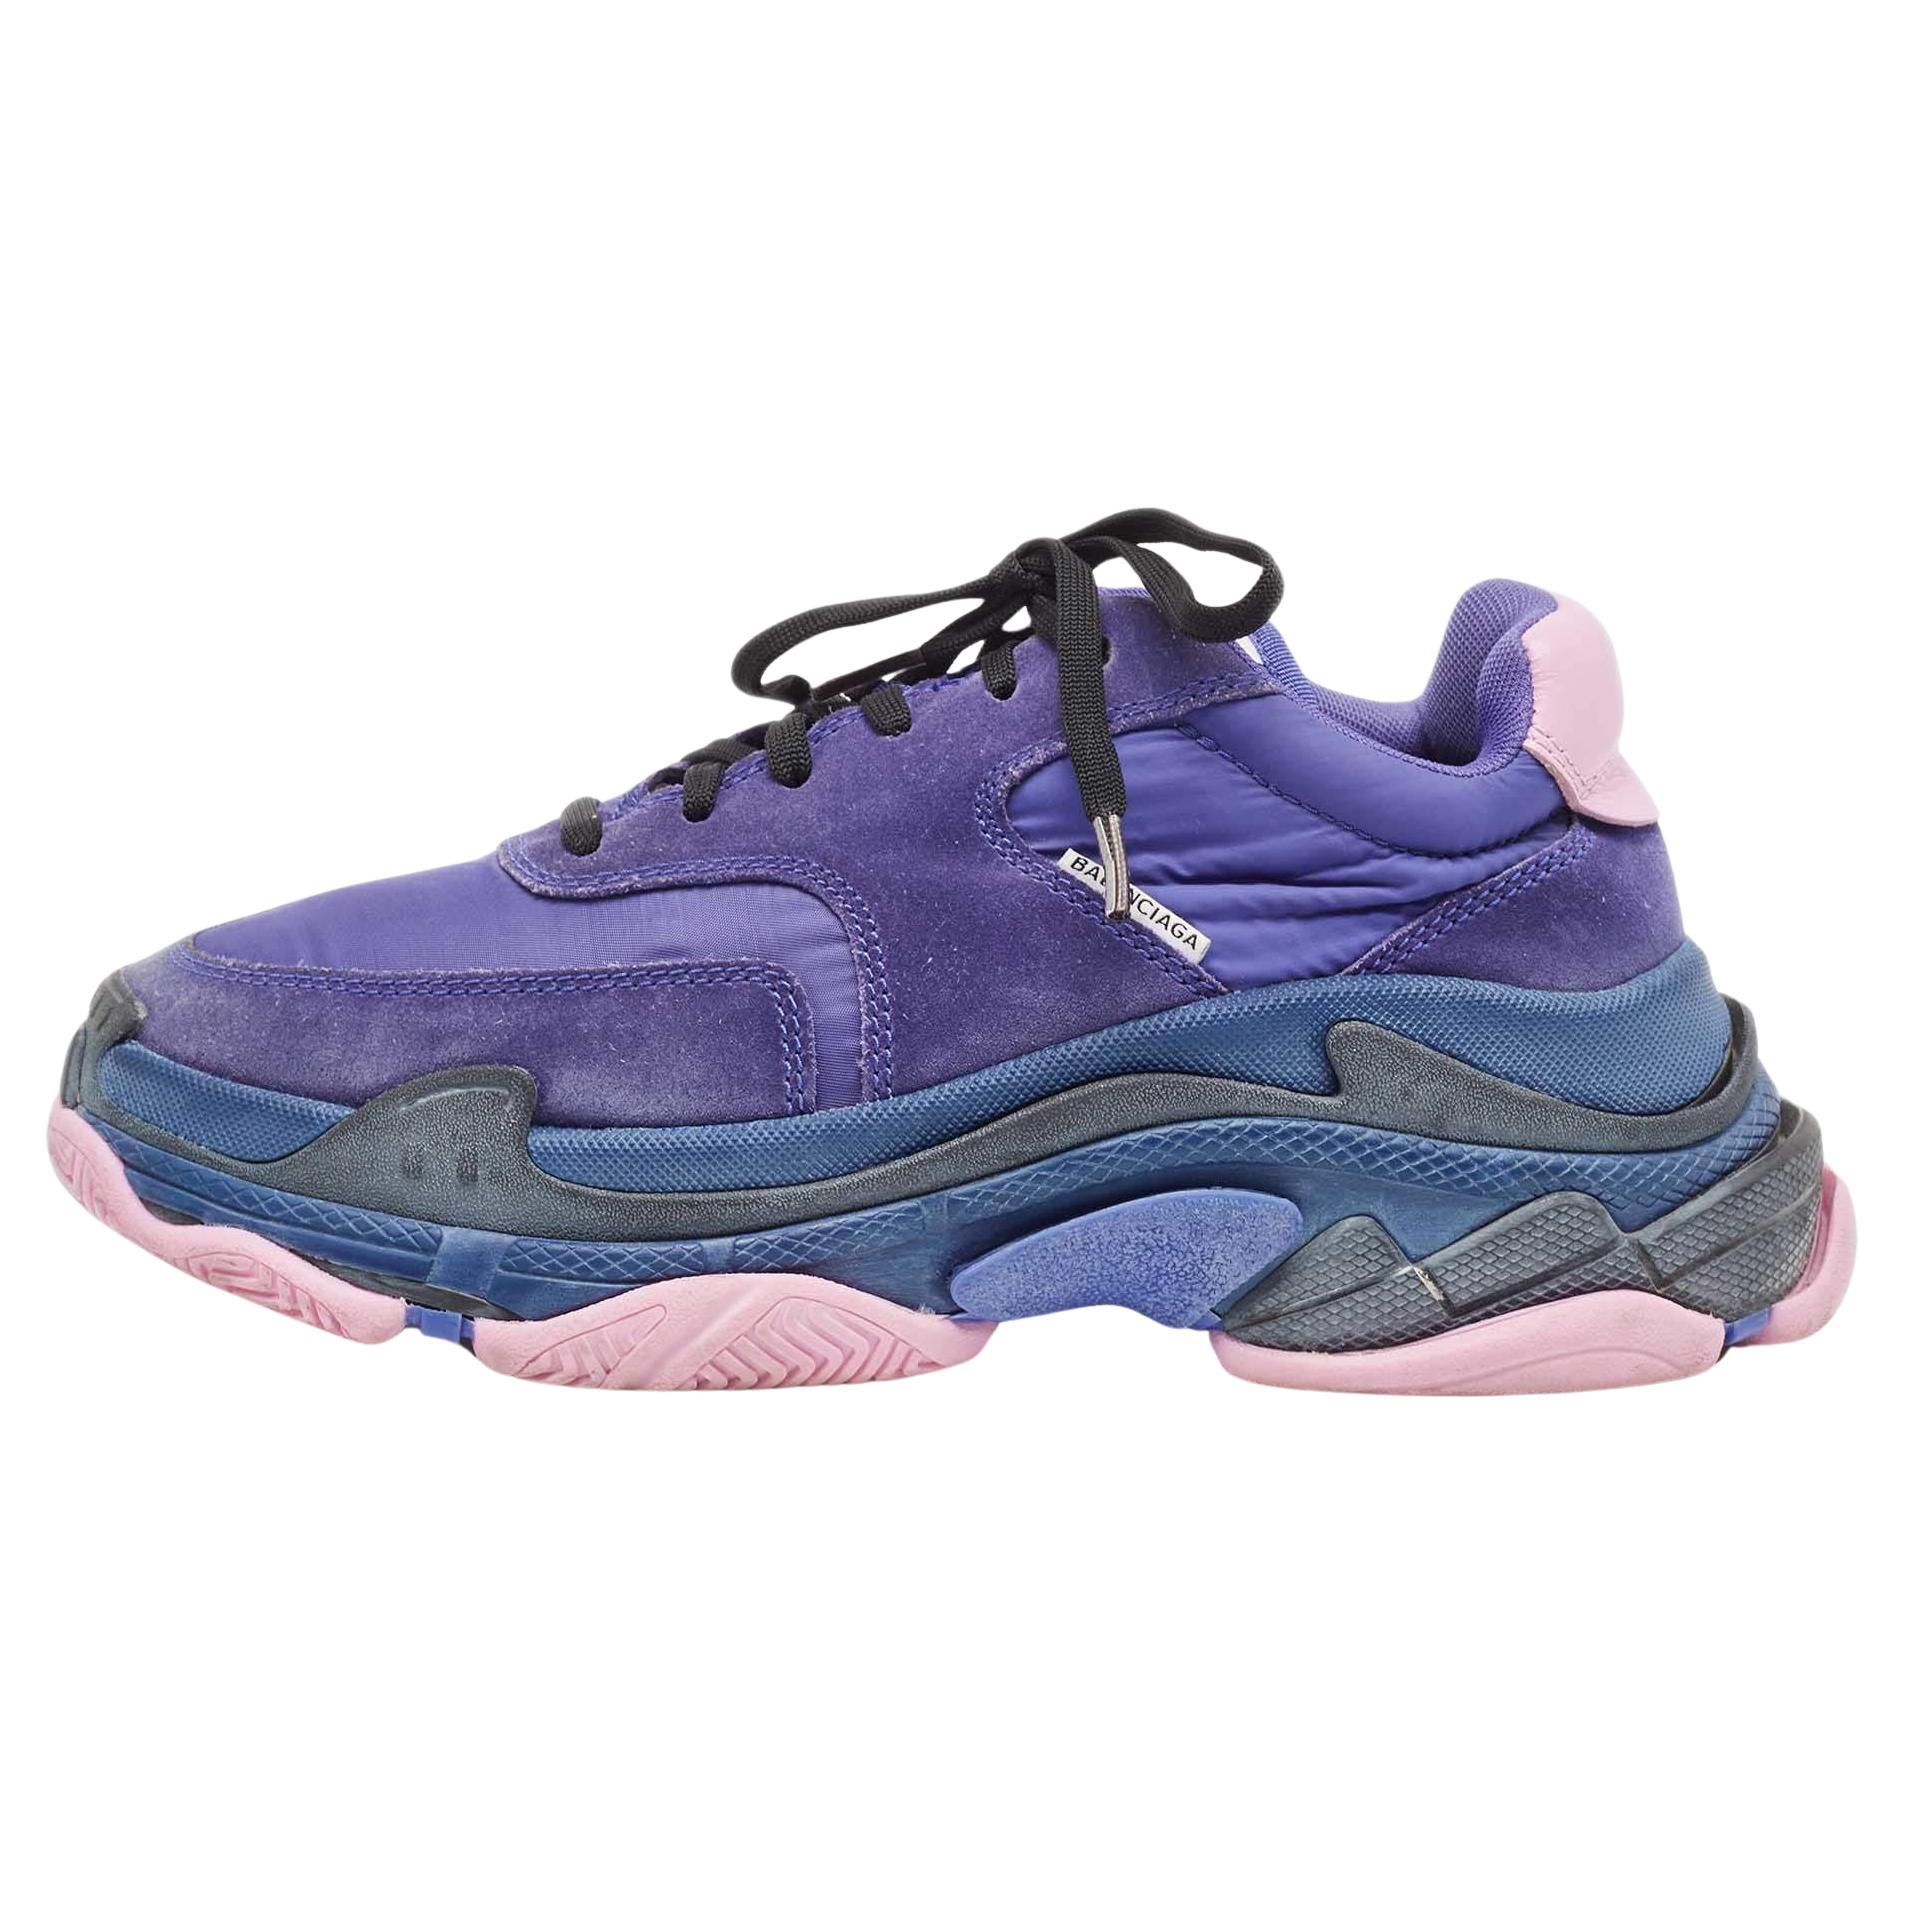 Balenciaga Purple Neoprene And Suede Triple -S Sneakers Size 40 For Sale